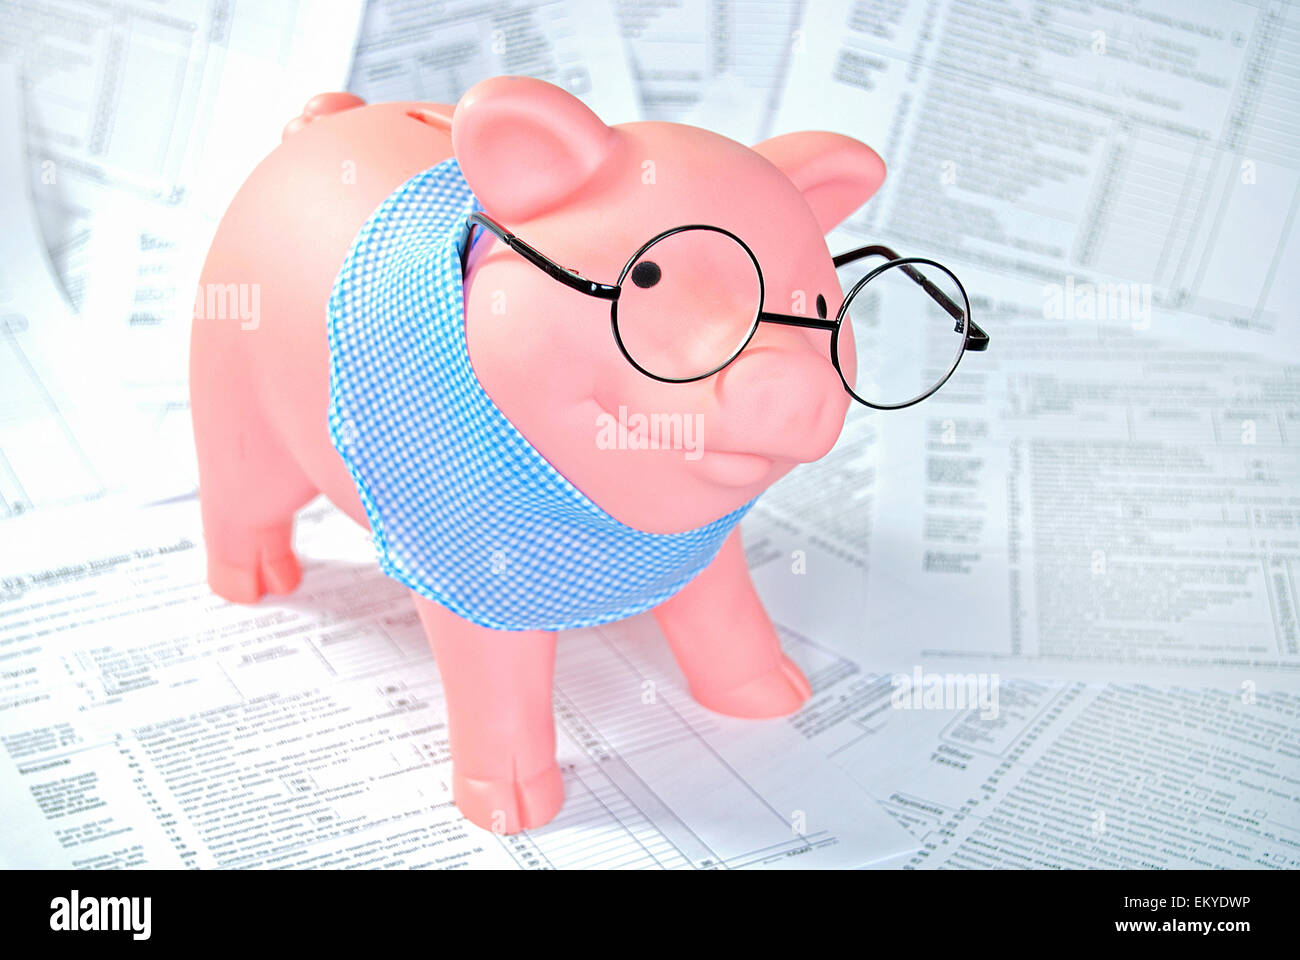 Piggy bank with glasses and gingham scarf on income tax forms. Stock Photo